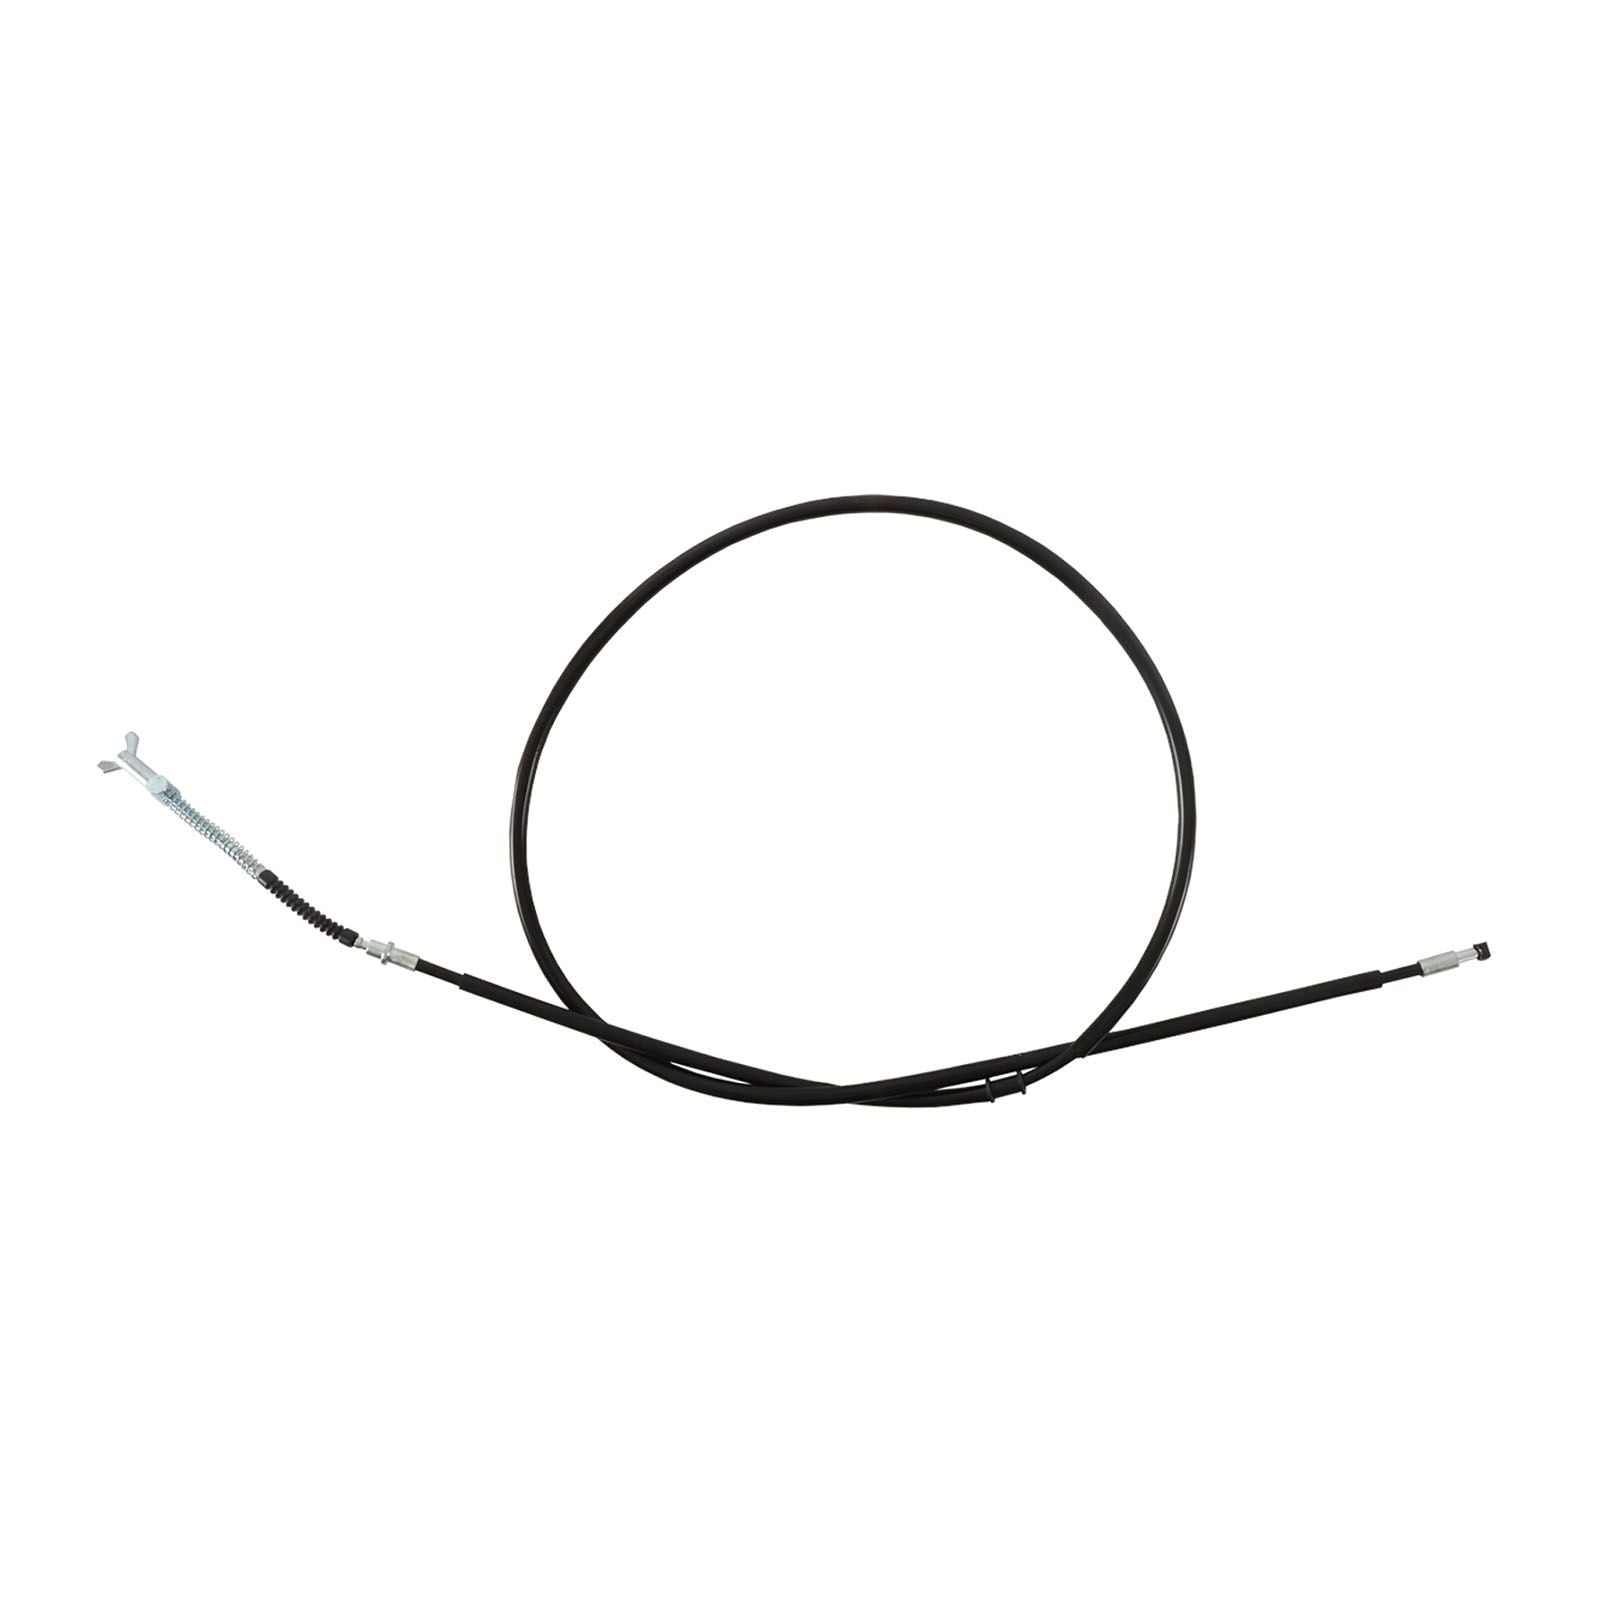 New ALL BALLS Racing Park Hand Brake Cable - Rear #AB454076